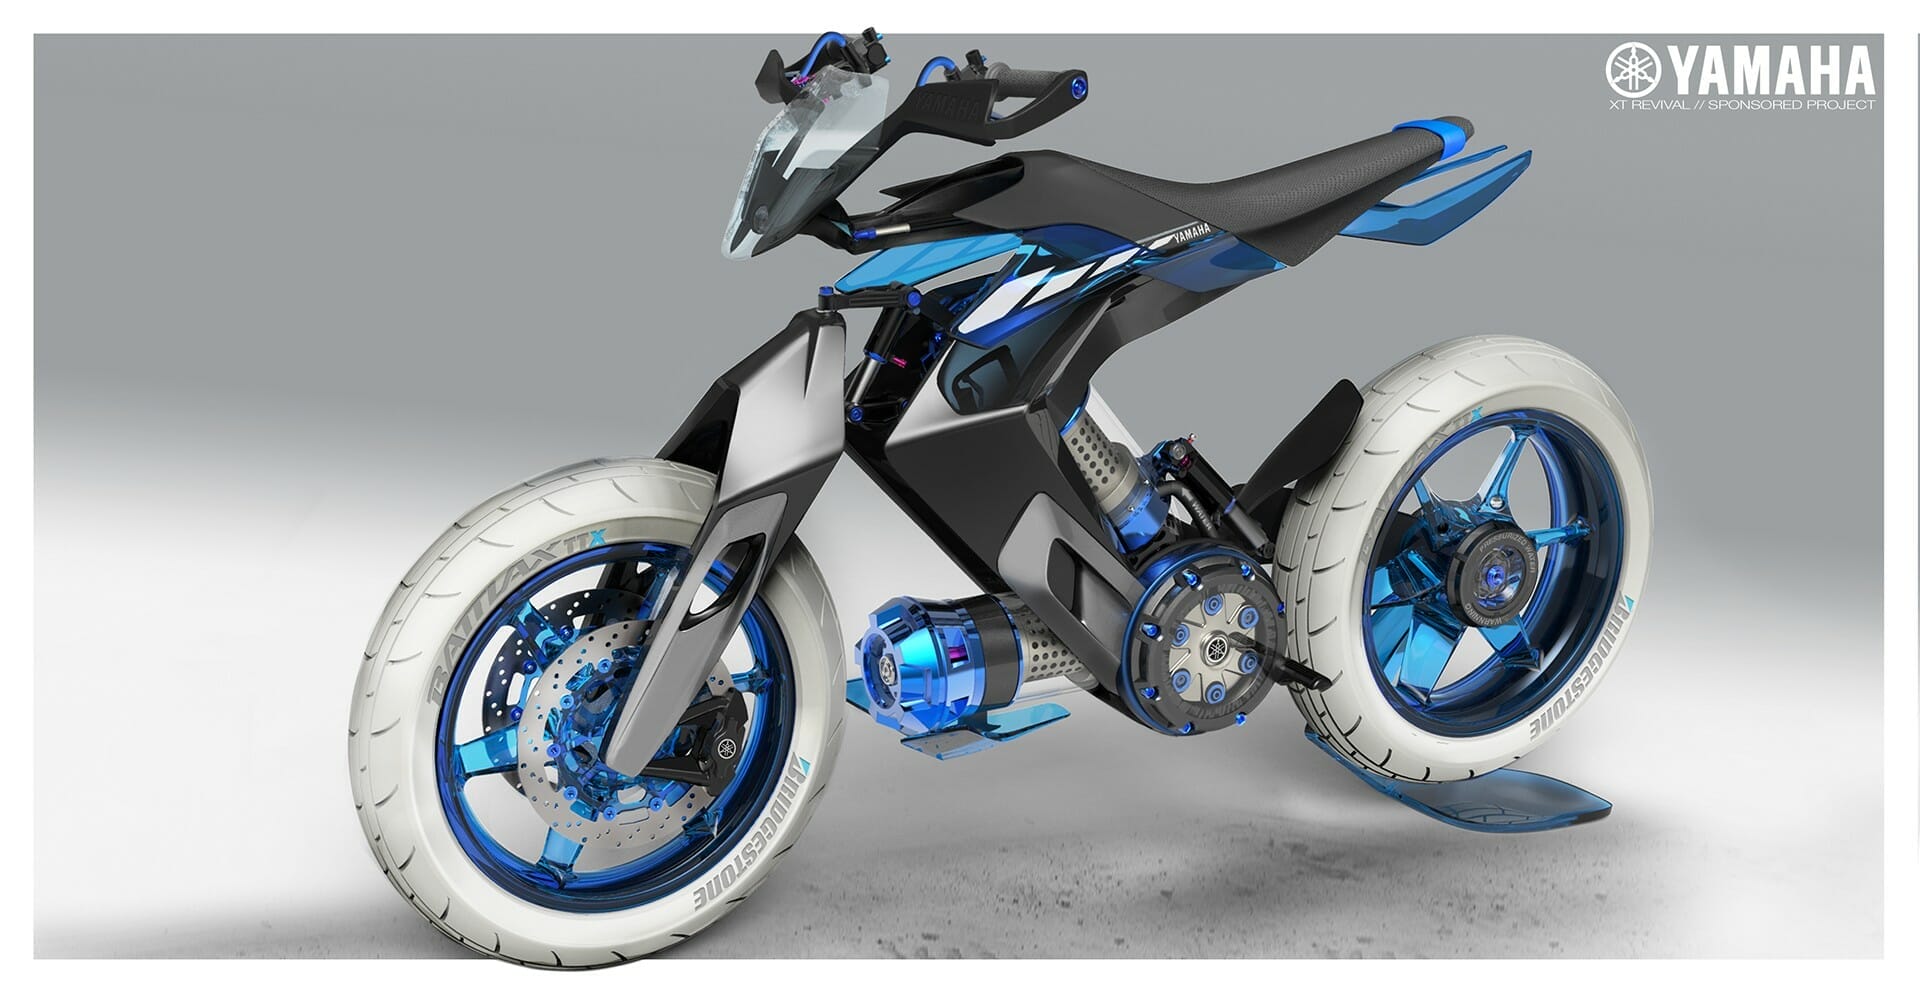 Yamaha XT 500 H2O Concept
- also in the App MOTORCYCLE NEWS